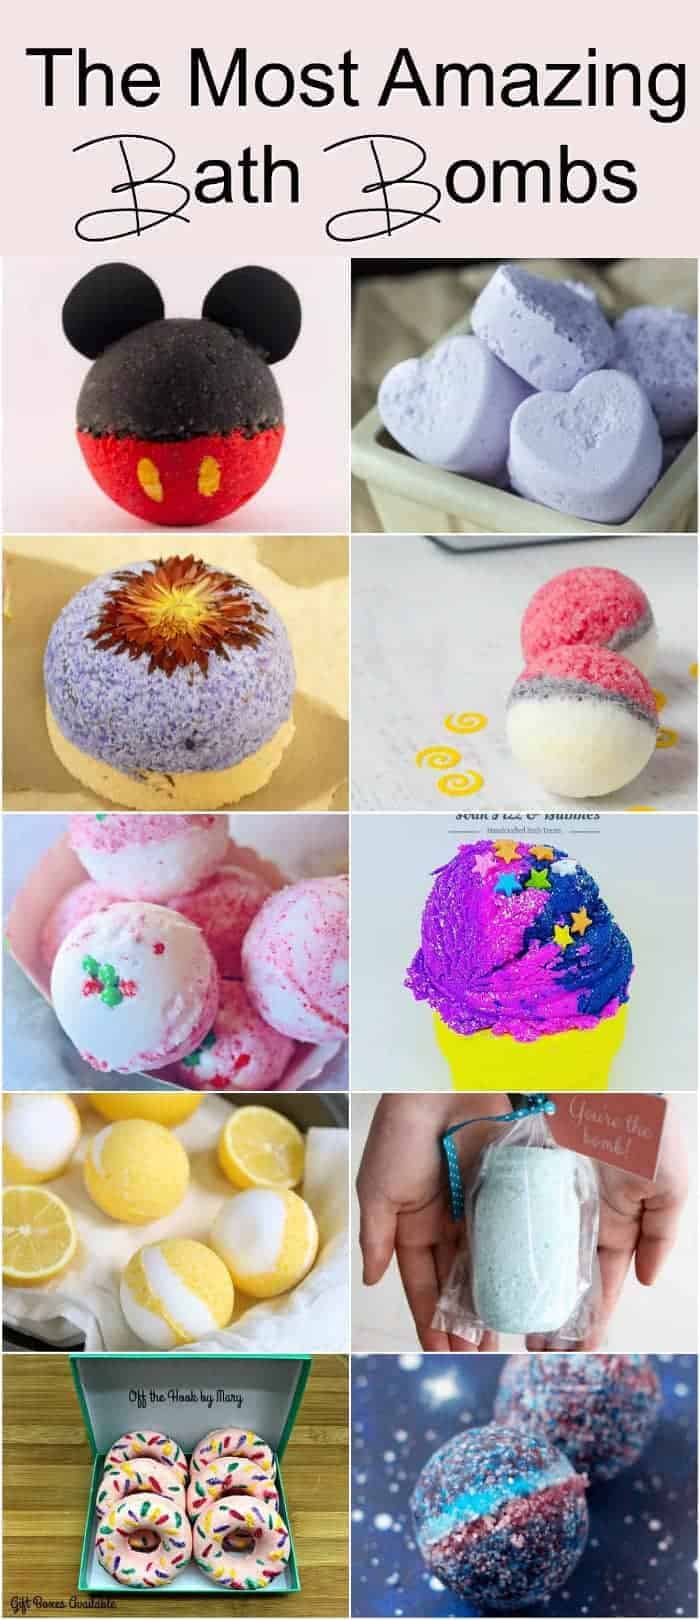 The Most Amazing Bath Bombs - these DIY bath bomb recipes make amazing DIY holiday gifts or teacher appreciation gifts or anytime DIY gifts!